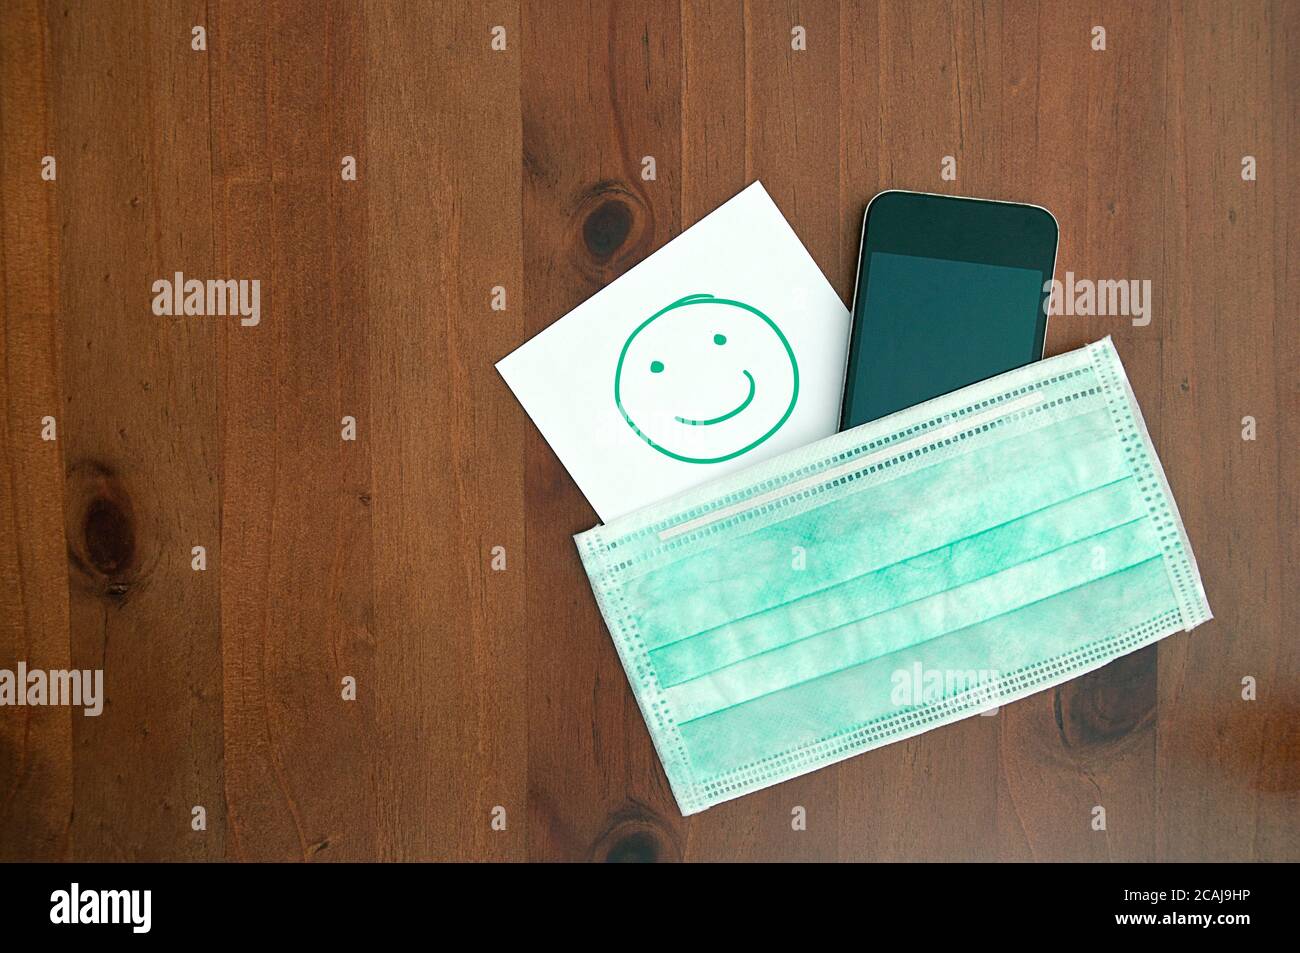 healthcare hygienic mask smartphone smile paper wooden background Foto Stock